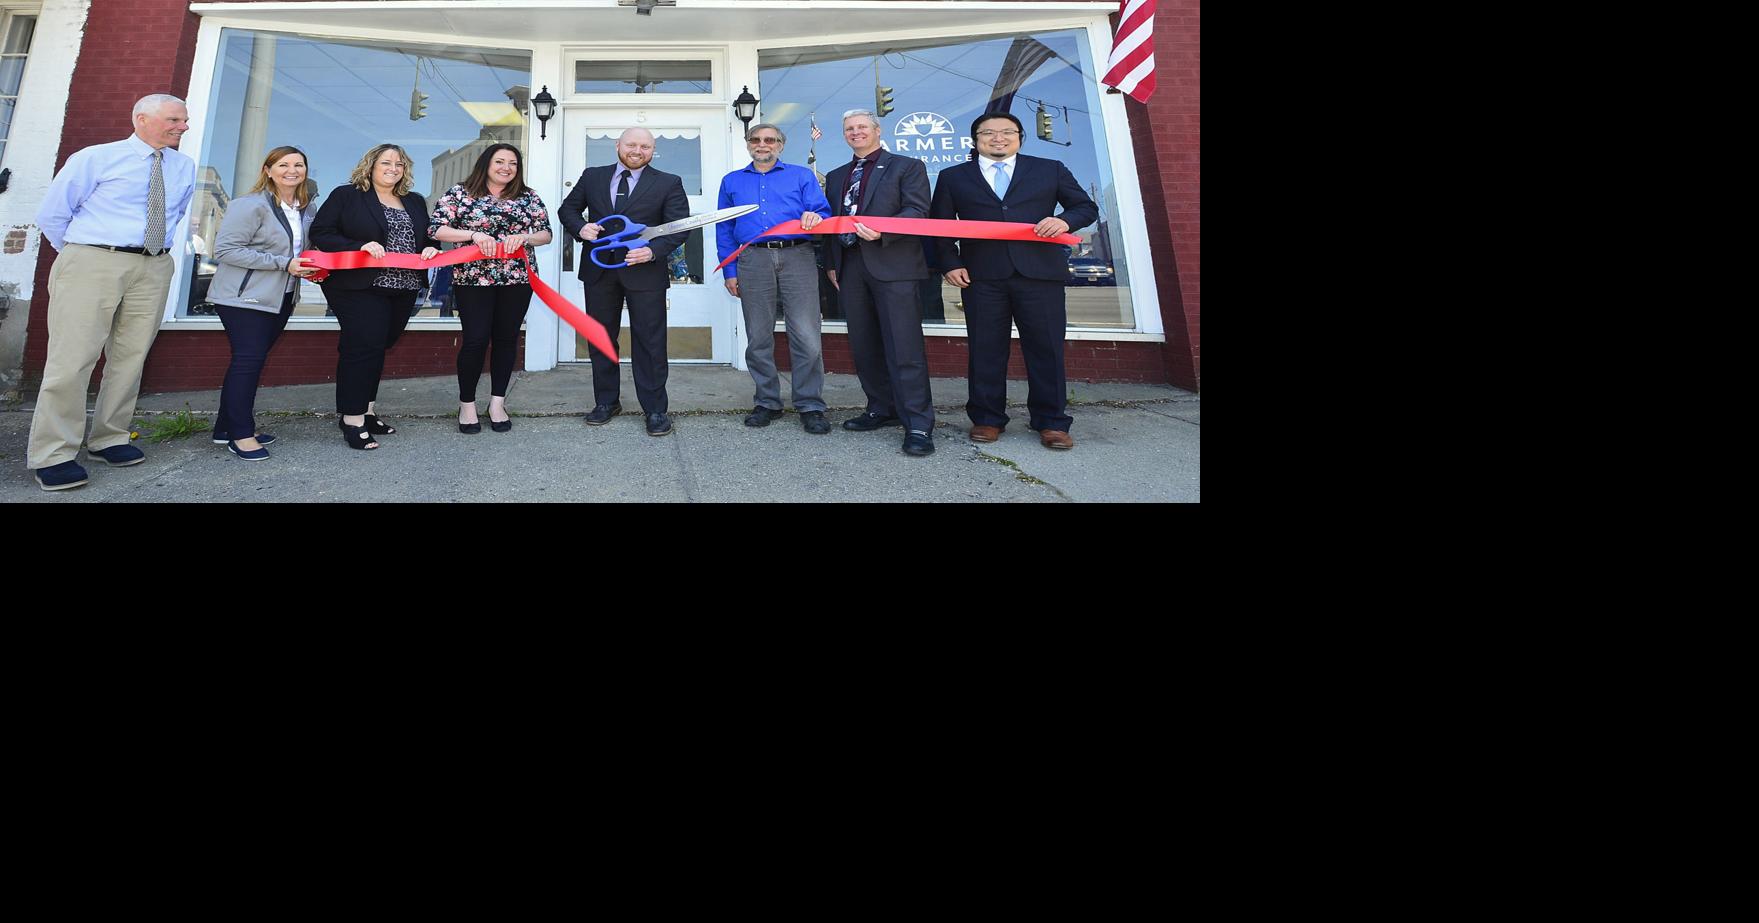 JOIN BOXCAR & THE WALDWICK CHAMBER OF COMMERCE Grand Opening